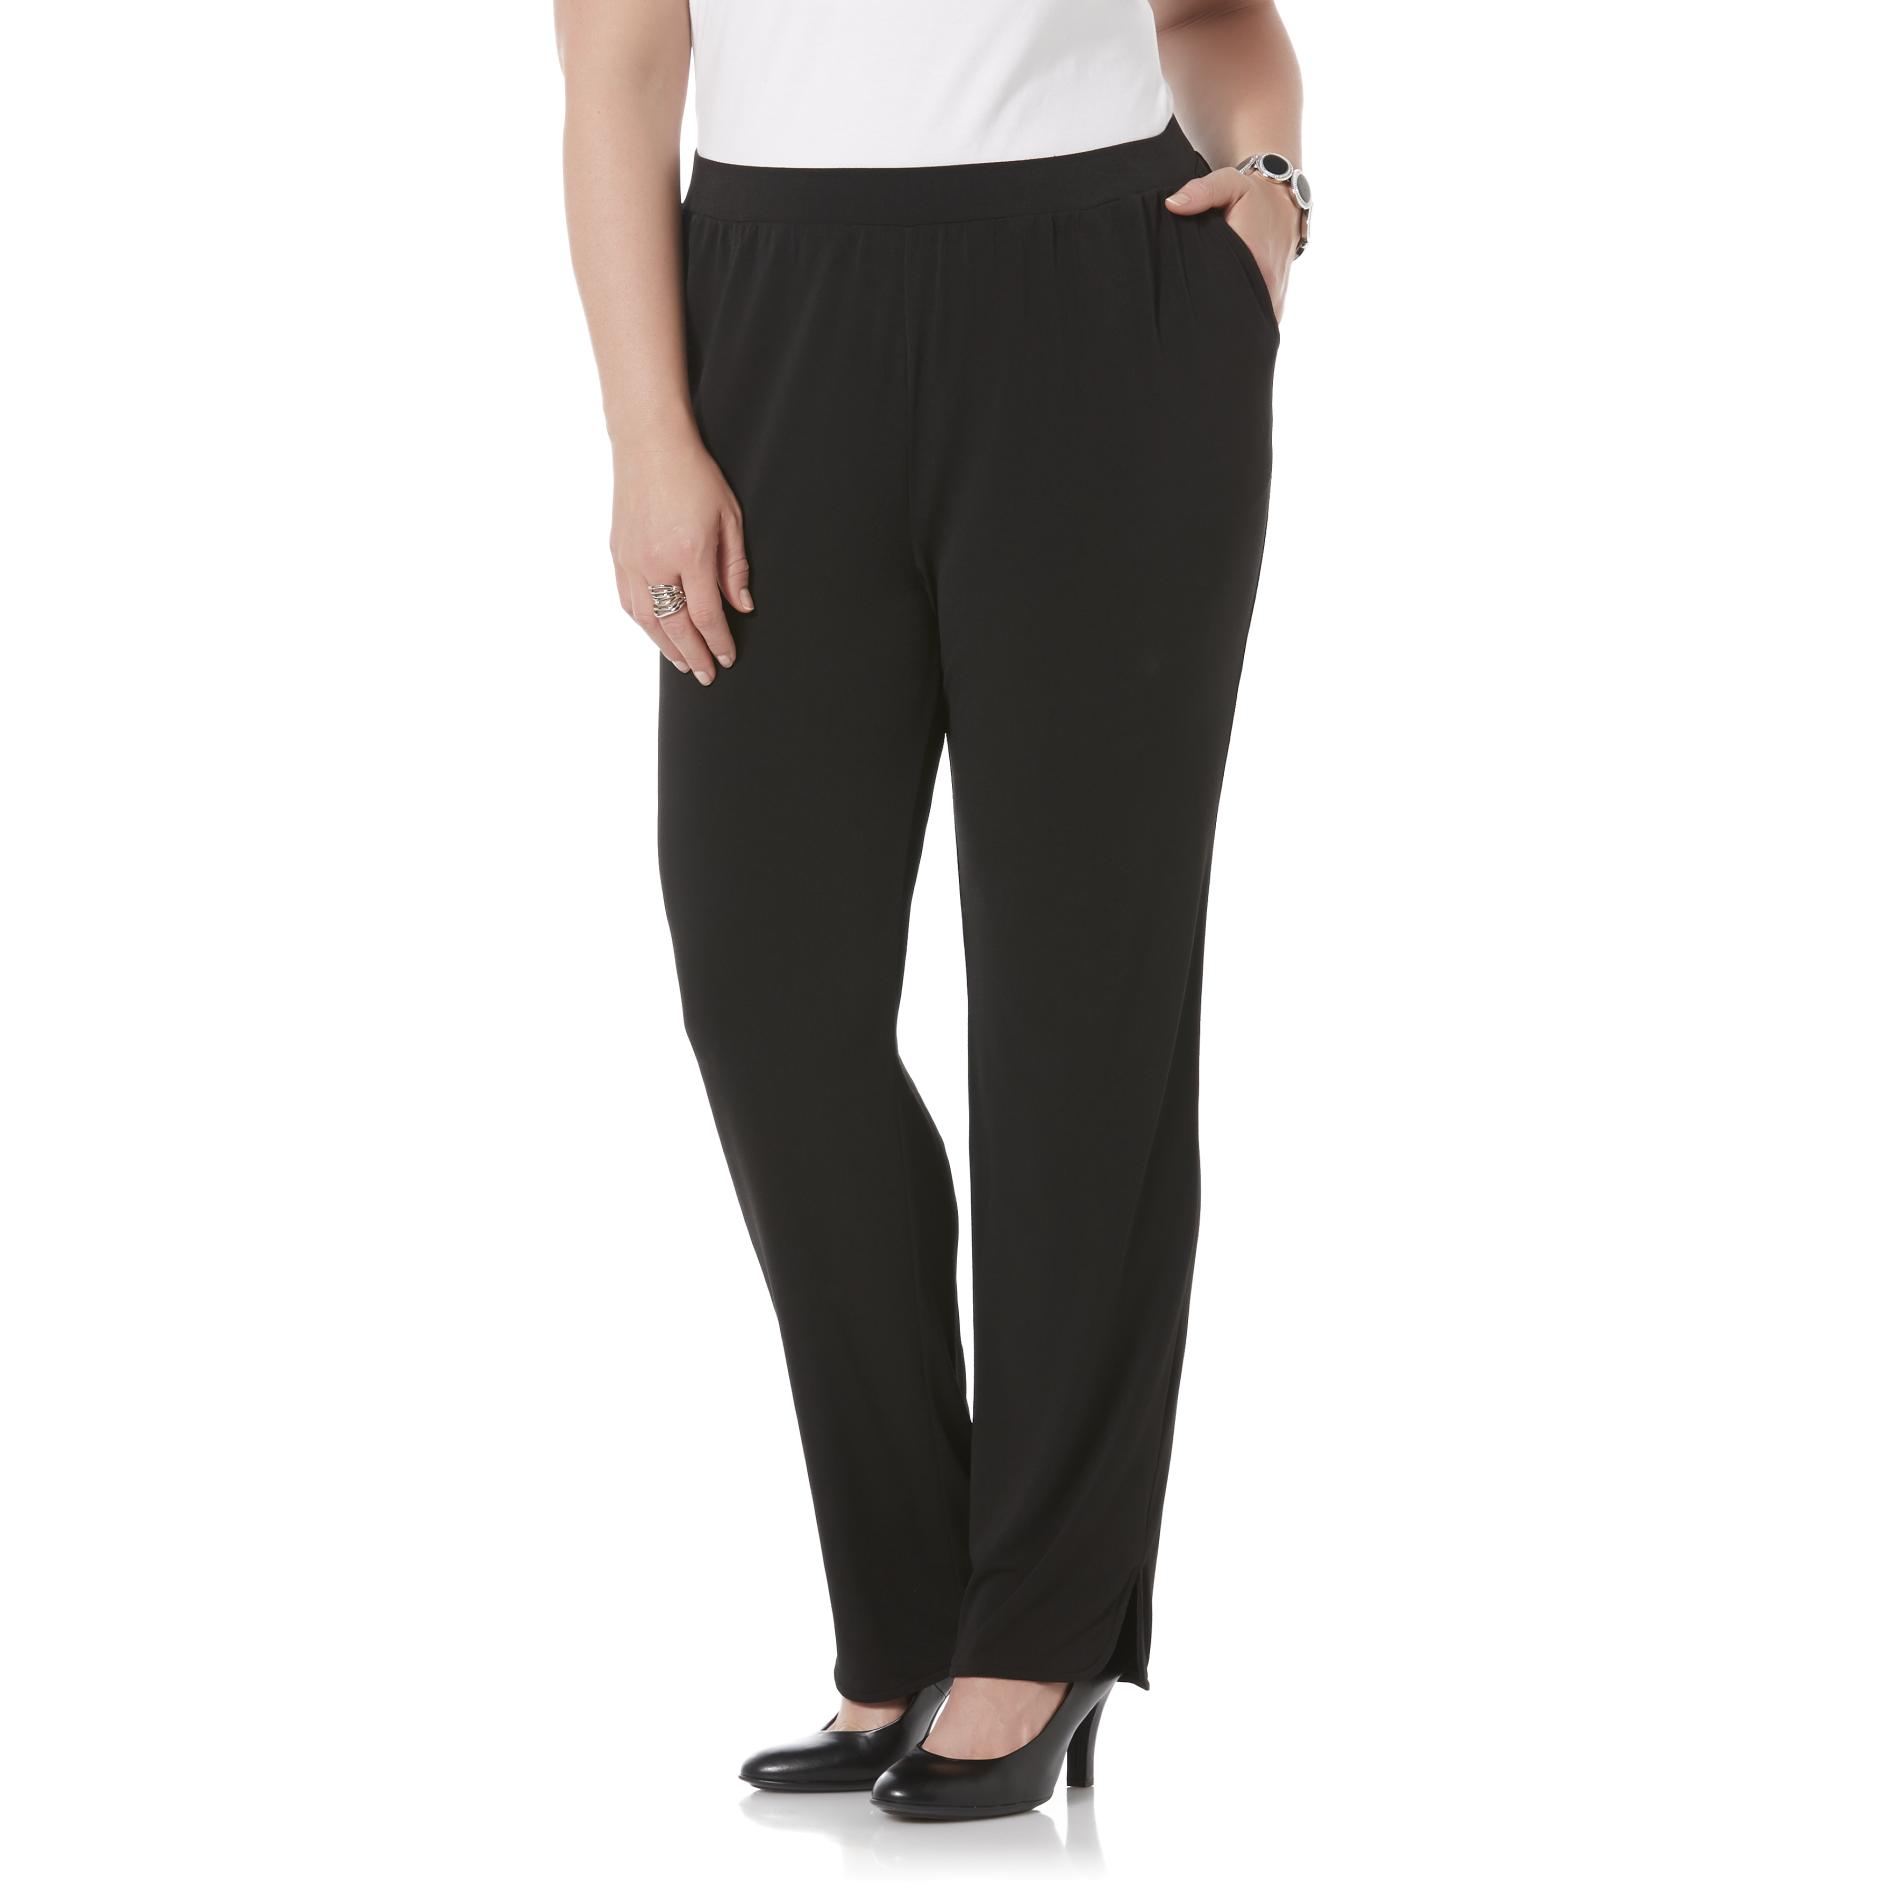 Jaclyn Smith Women's Plus Slinky Knit Pants - Clothing, Shoes & Jewelry ...